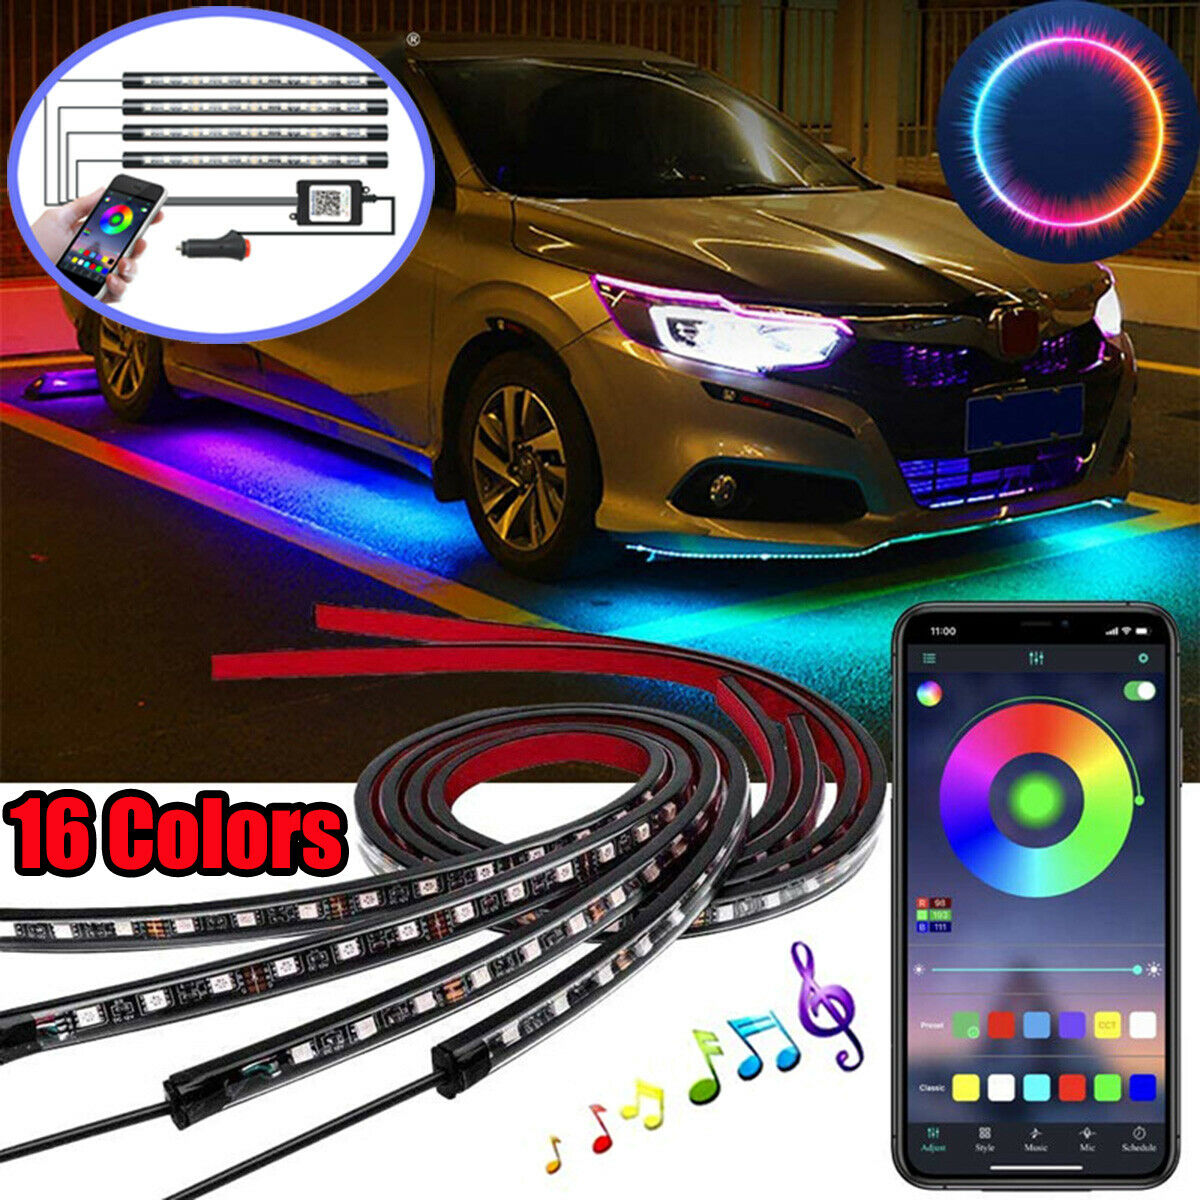 Auto LED RGB Interior Atmosphere Strip Light Decorative Foot Lamp With USB Wireless Remote Music Control Multiple Modes For Car